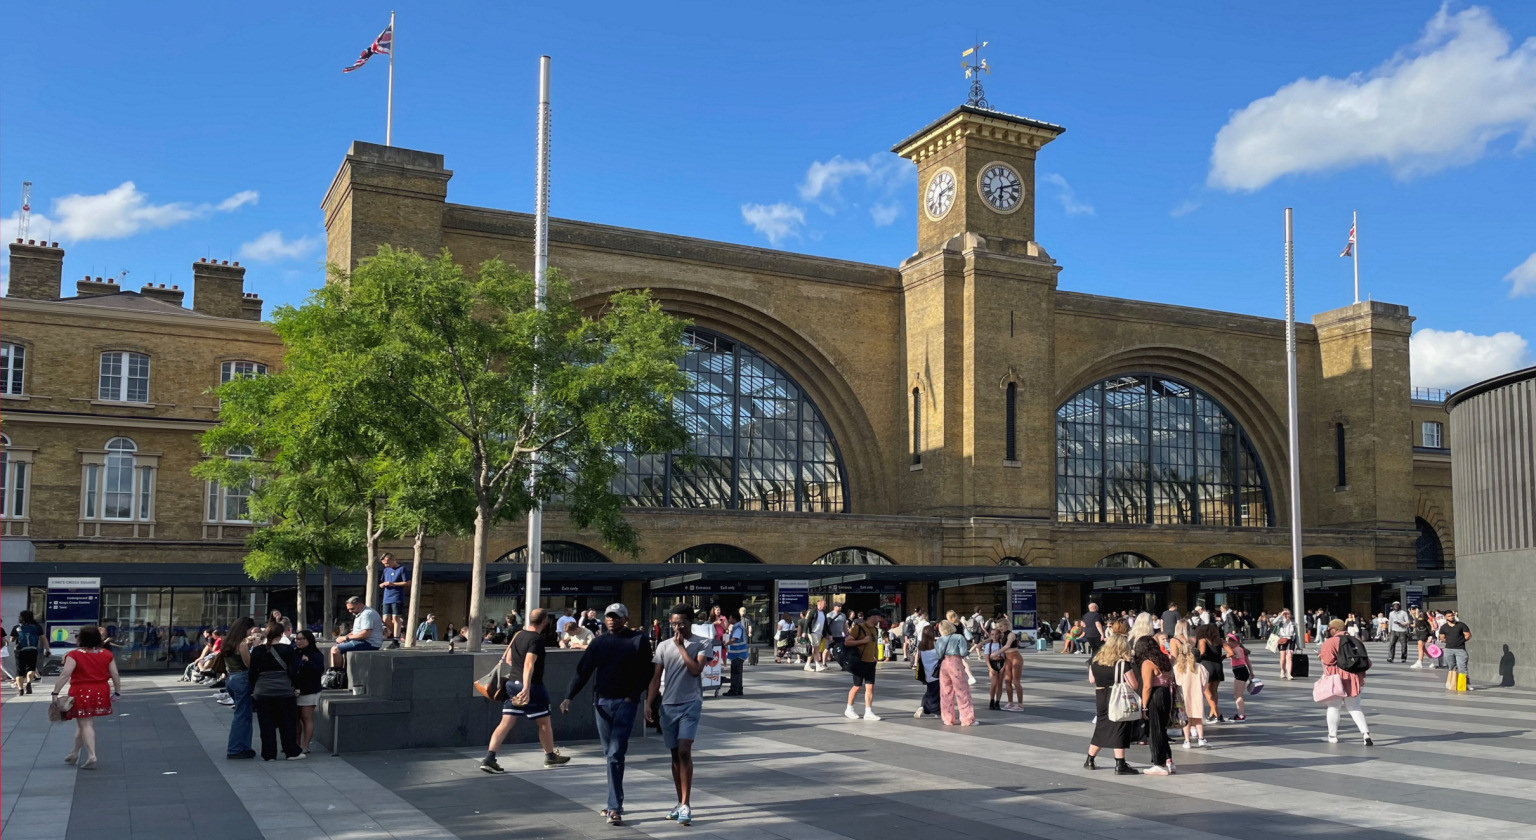 King's Cross mainline station frontage